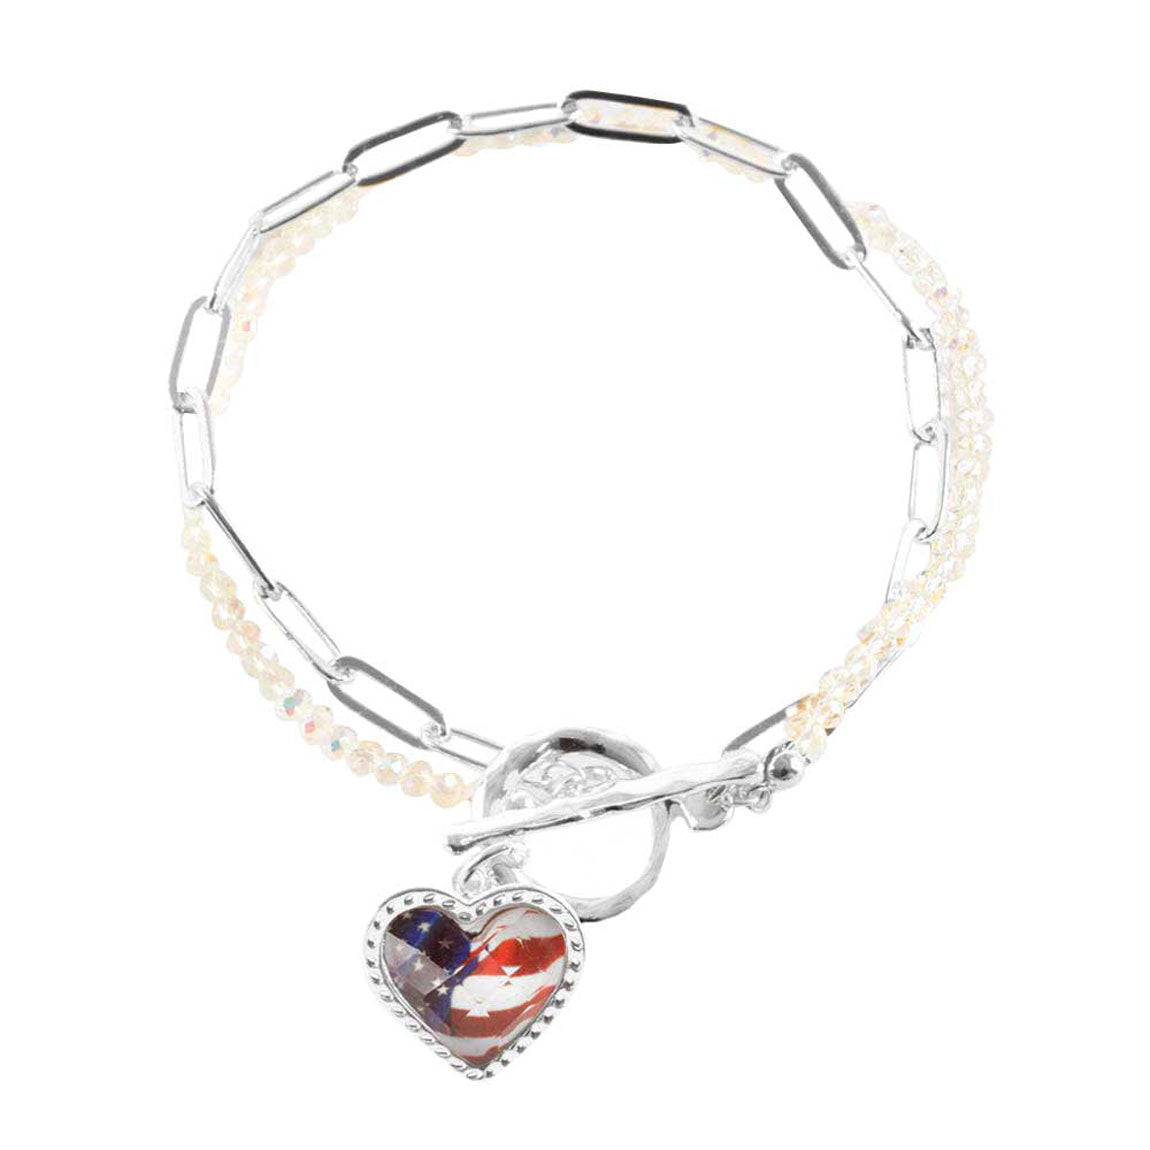 Rhodium American USA Flag Heart Charm Double Layered Toggle Bracelet, add a statement to your outfit with this beautiful accessory. It’s has beautiful Heart & flag charms in our patriotic vibrant colors. Perfect of any time day or night, great for election day, national holiday, show how much you love this country. 